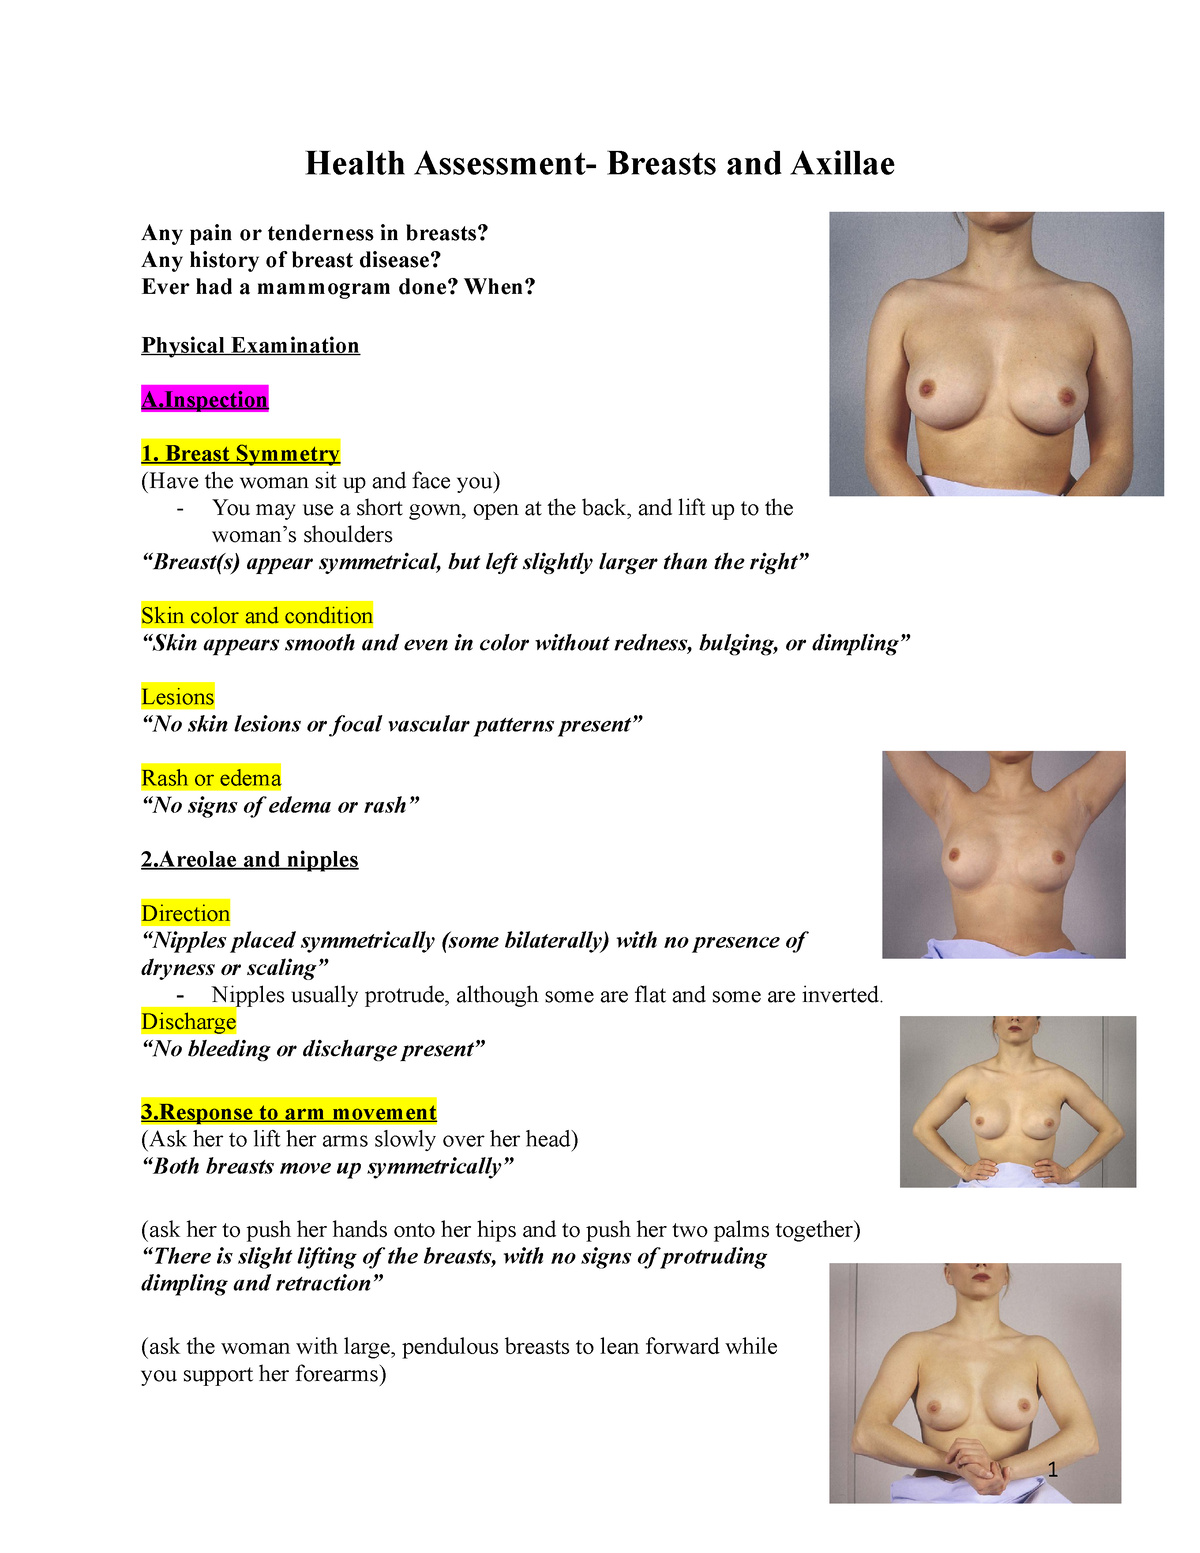 Breasts and Axillae Script - Health Assessment- Breasts and